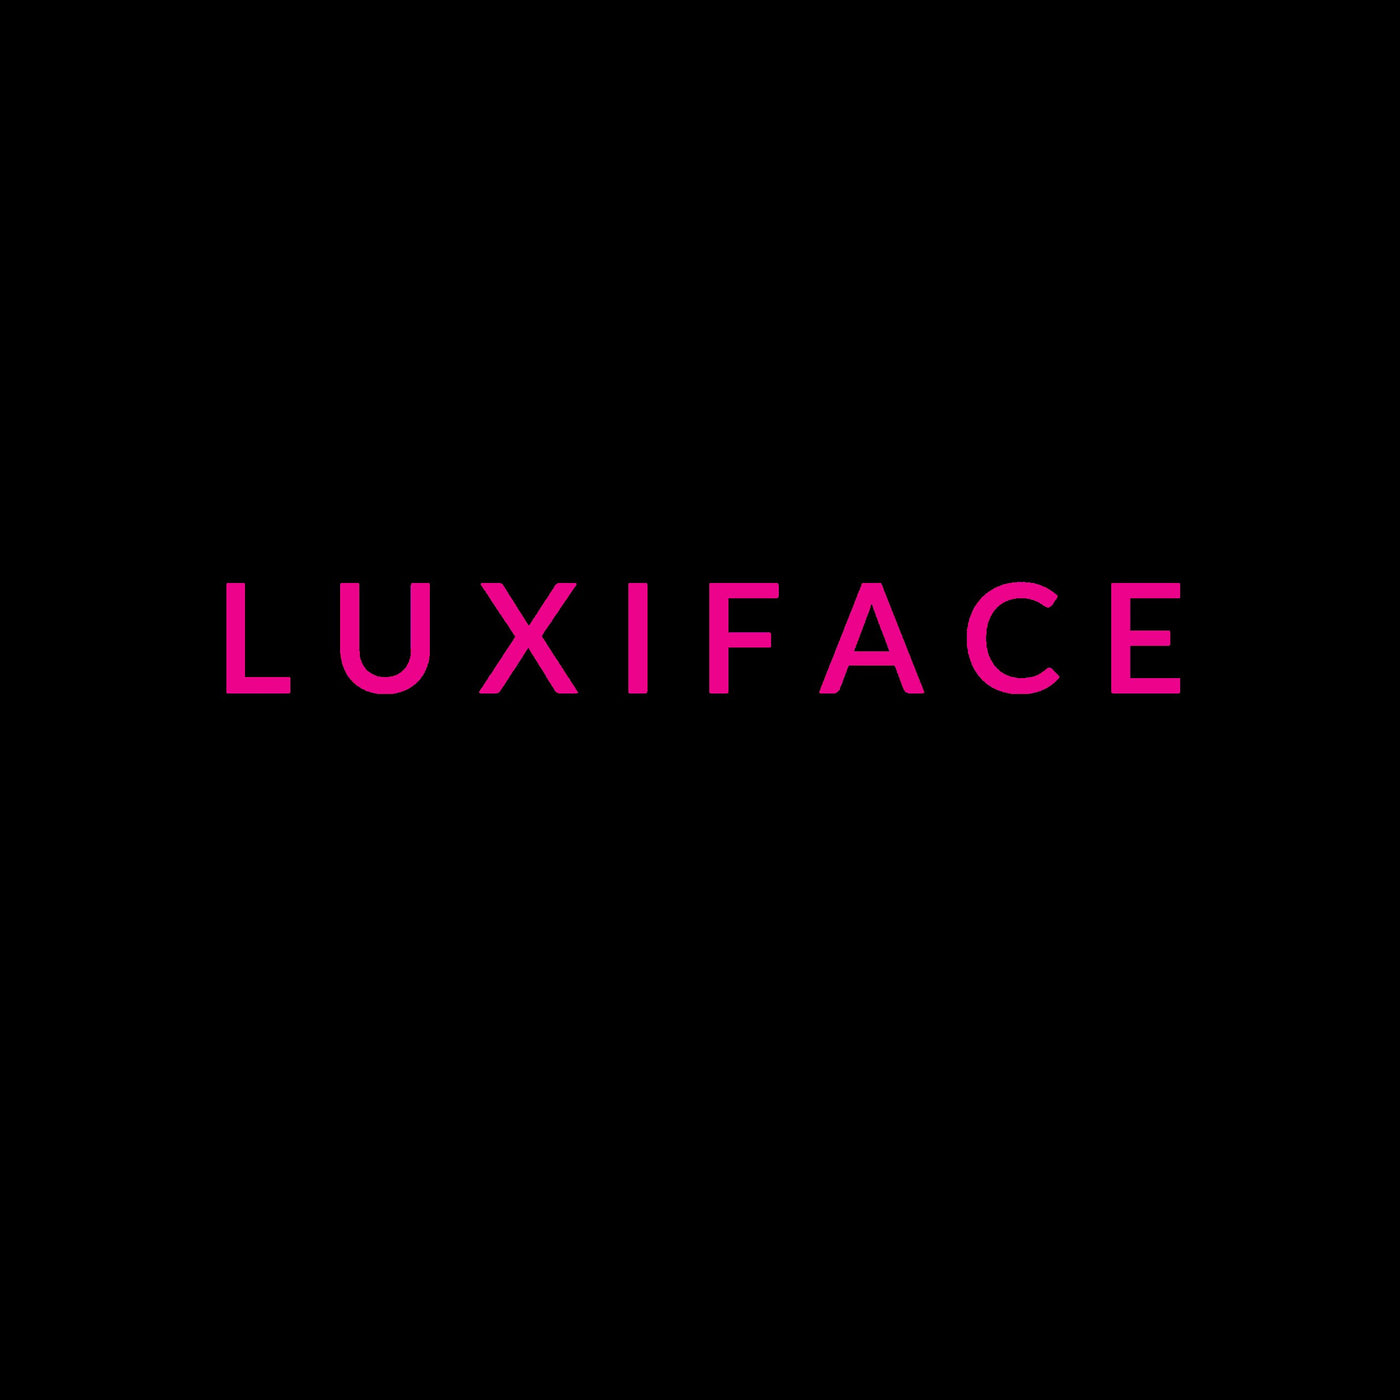 Luxiface brand products